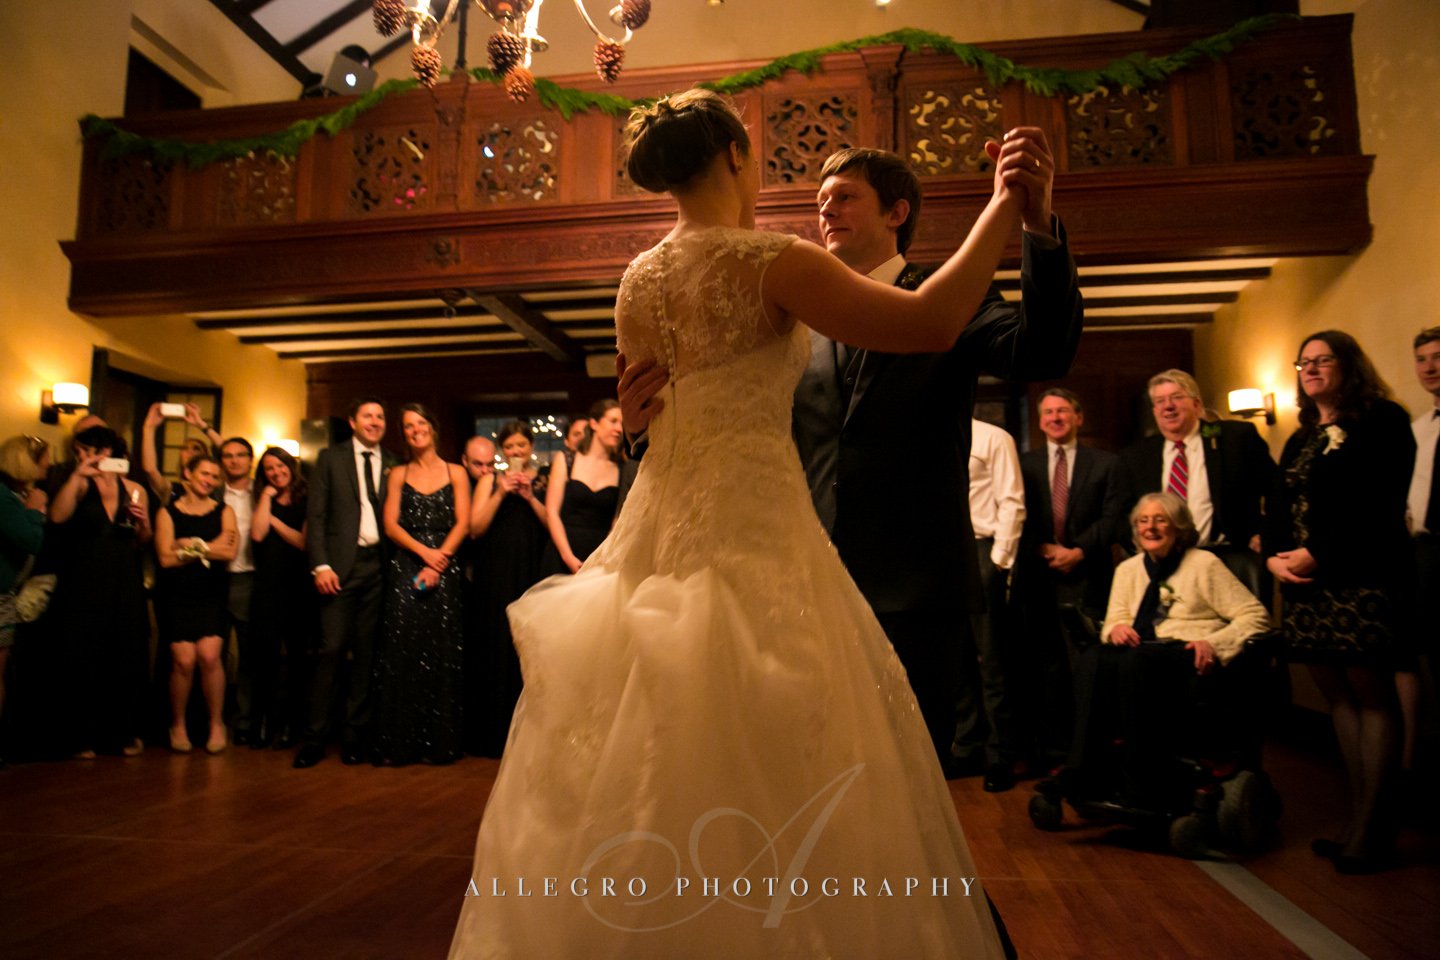 first dance - photo by allegro photography